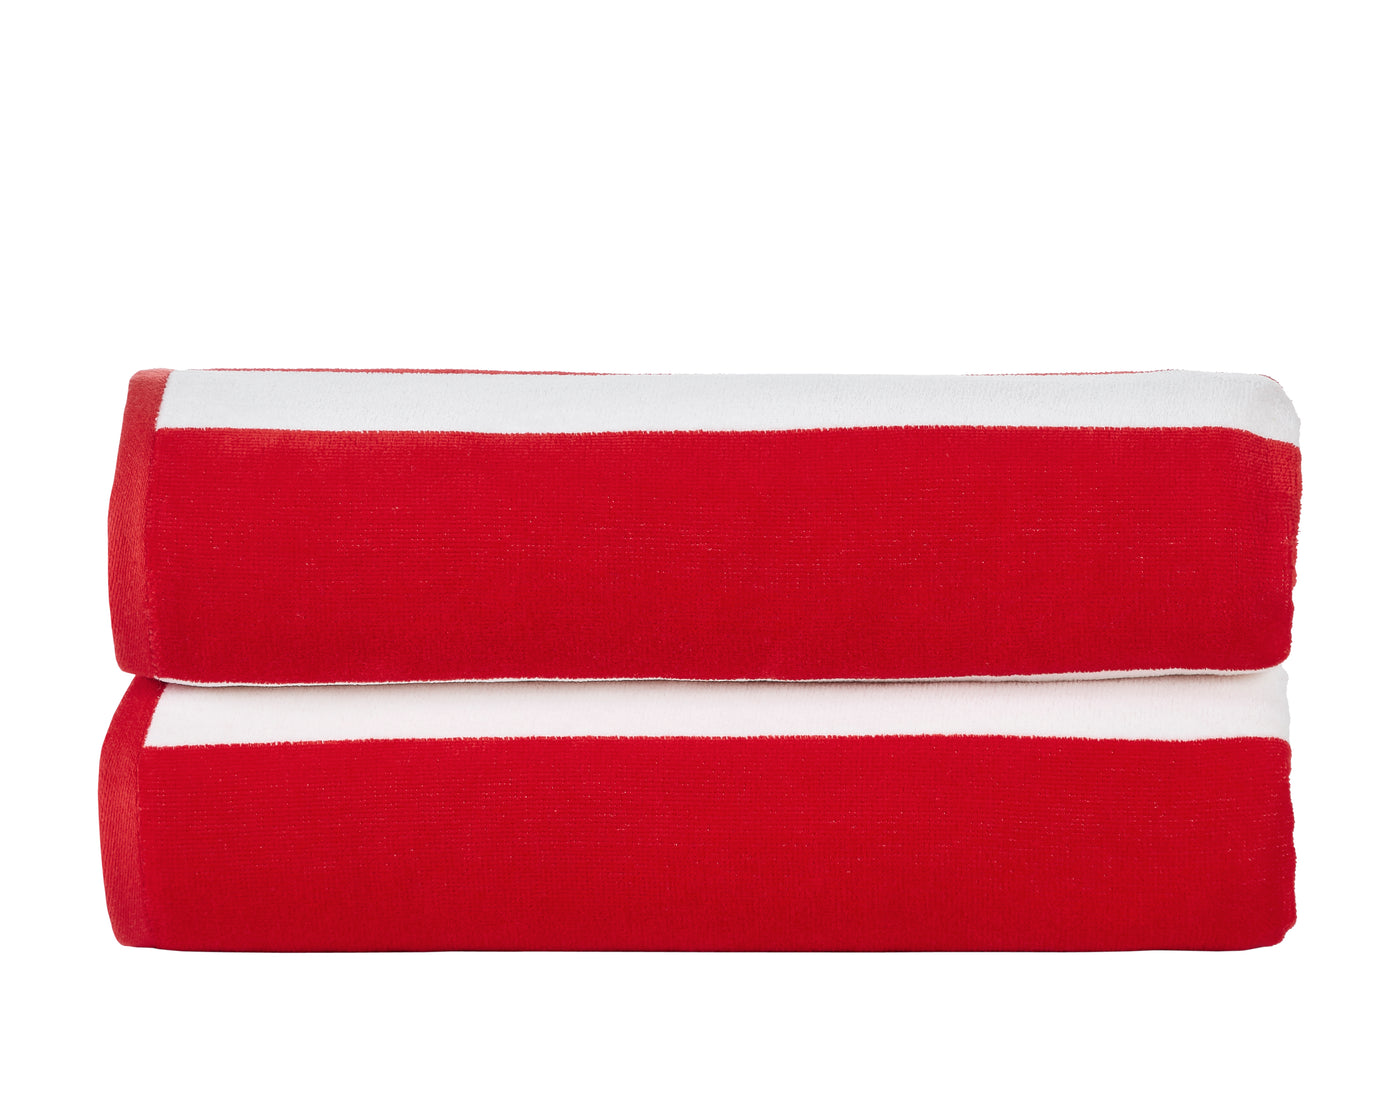 Cabana Stripe Velour Pool and Beach Towels 2 Pack (Red)